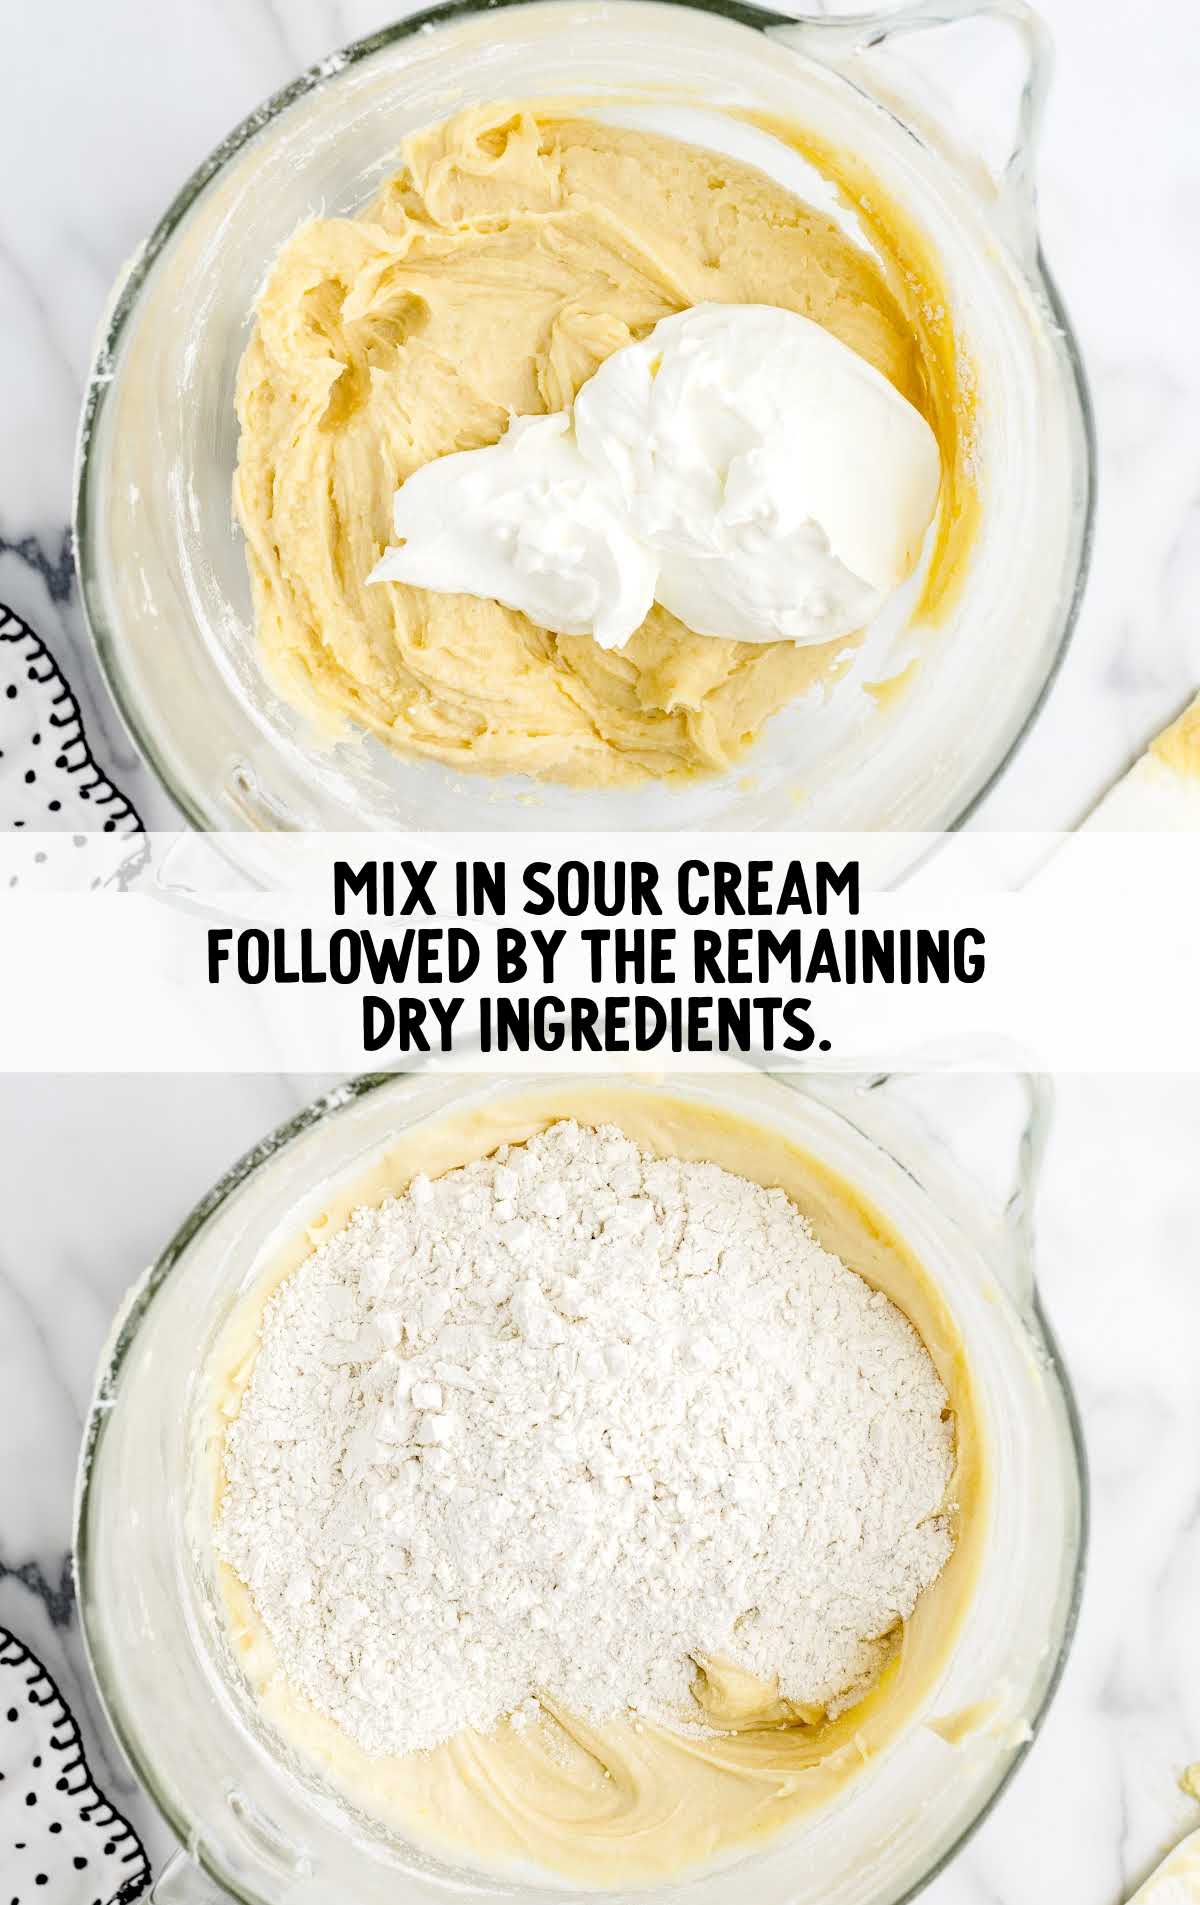 sour cream added to the dry ingredients in a bowl